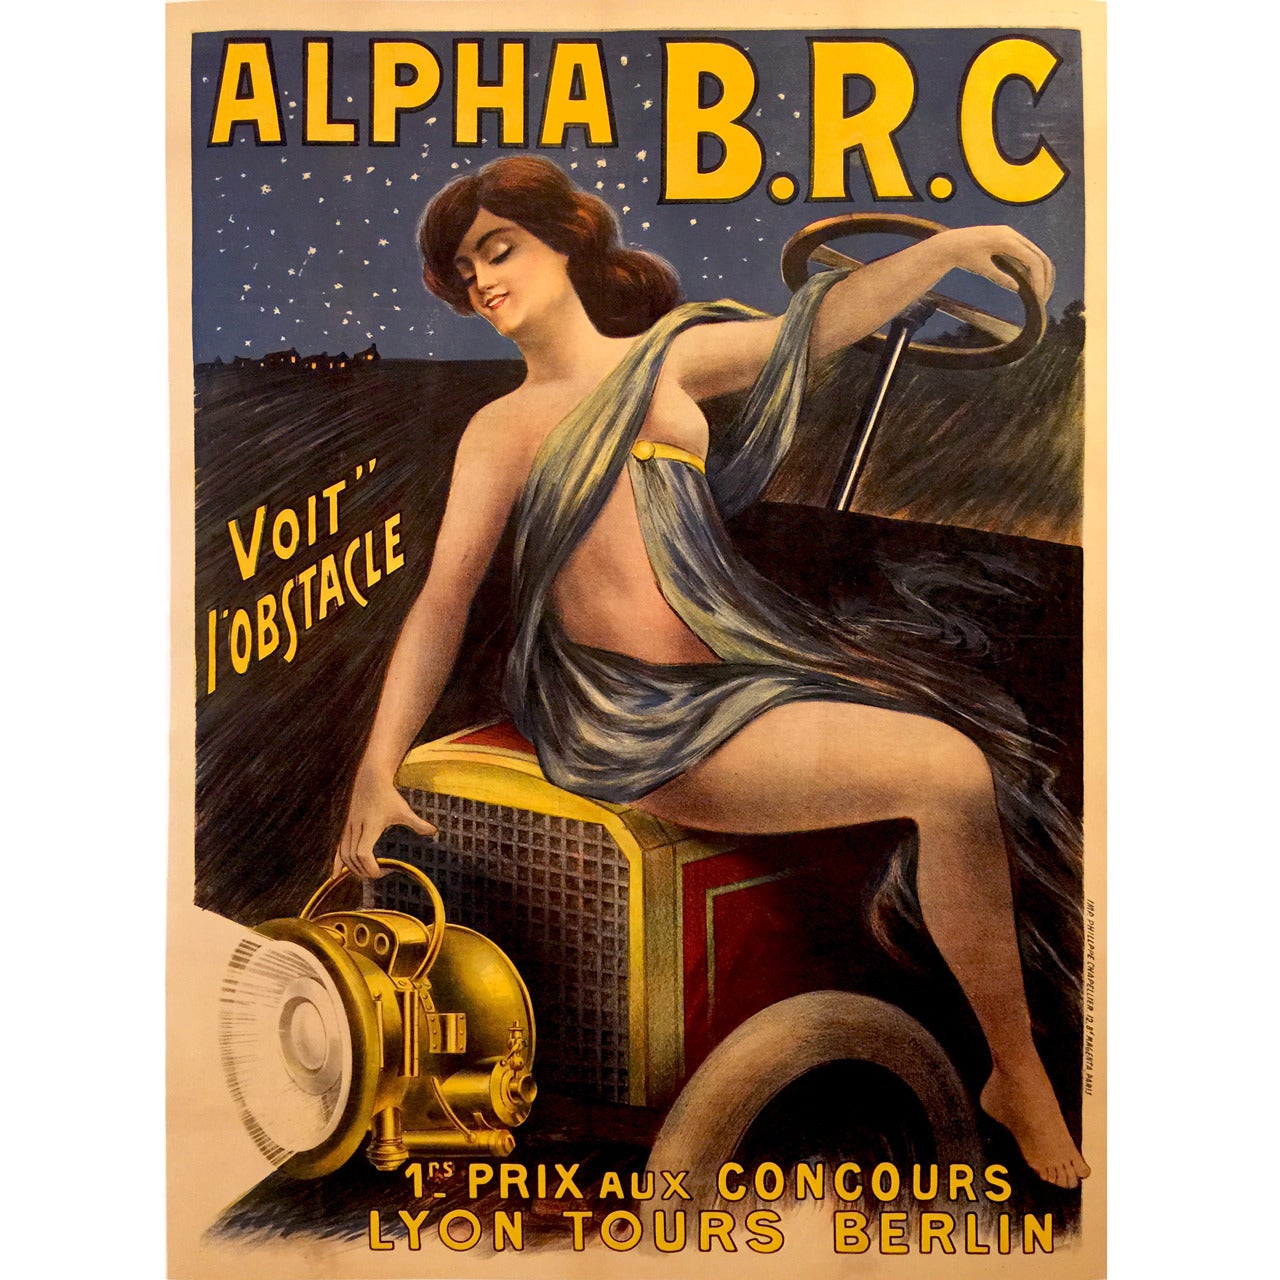 Rare French Art Nouveau Period Advertising Poster by Philippe Chapellier For Sale